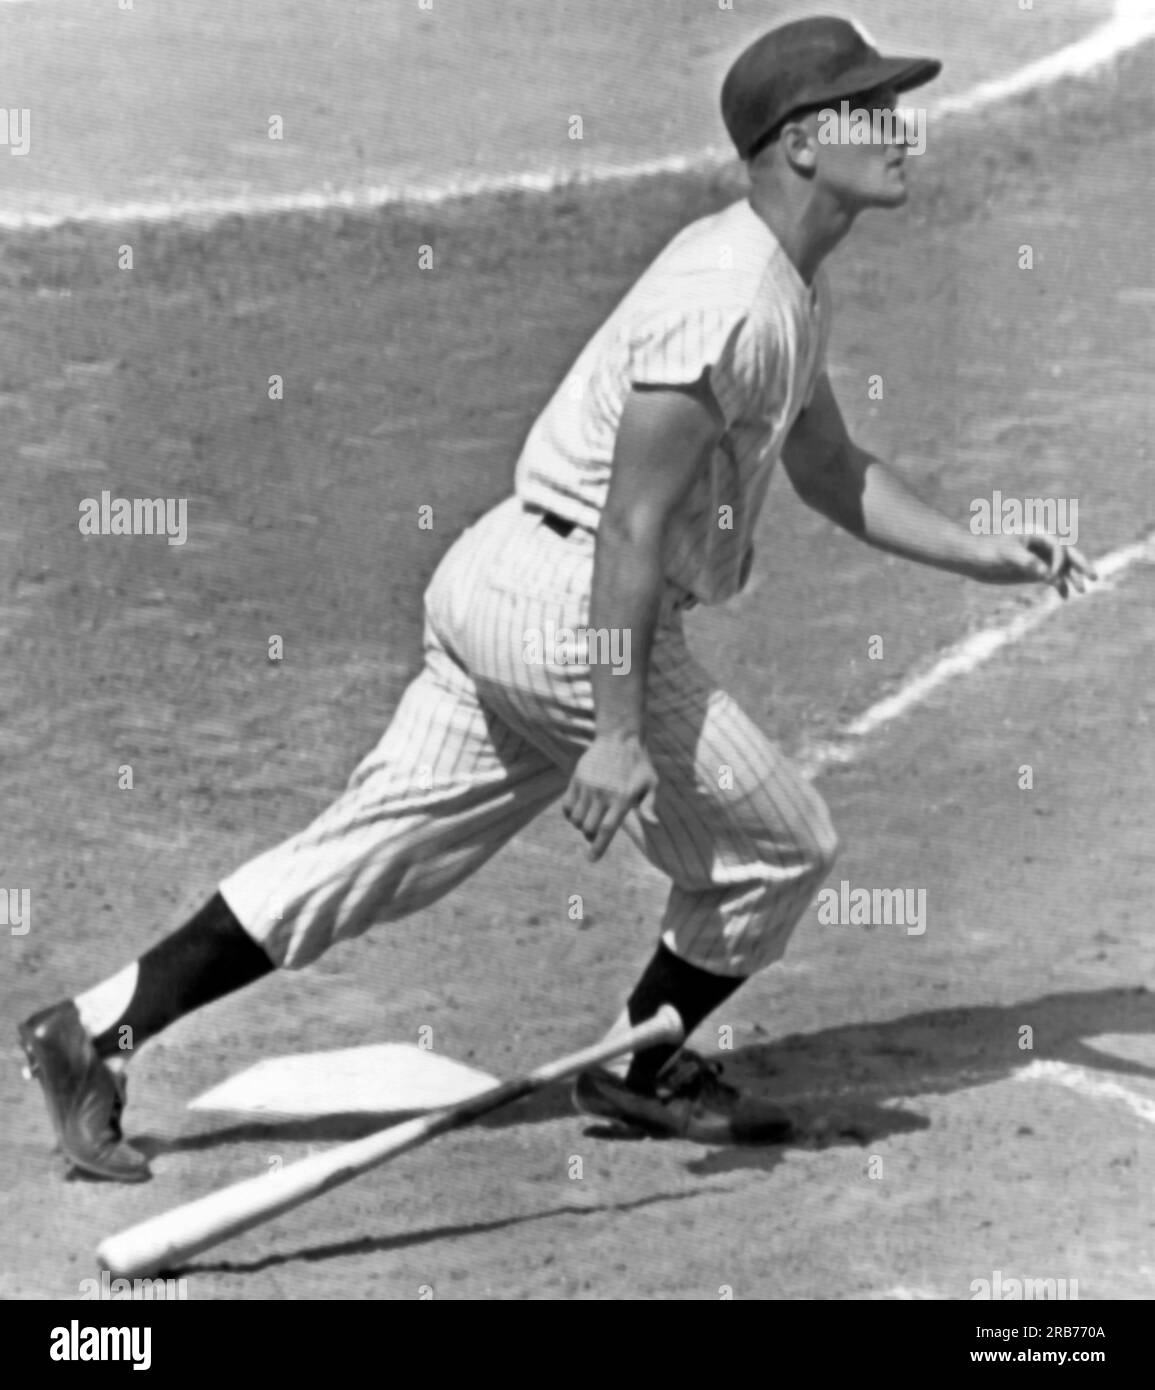 New York, New York:  August 17, 1961 New York Yankee slugger Roger Maris drops his bat and watches home run number 48 sail into the stands. He had hit number 47 earlier in the first inning. Stock Photo